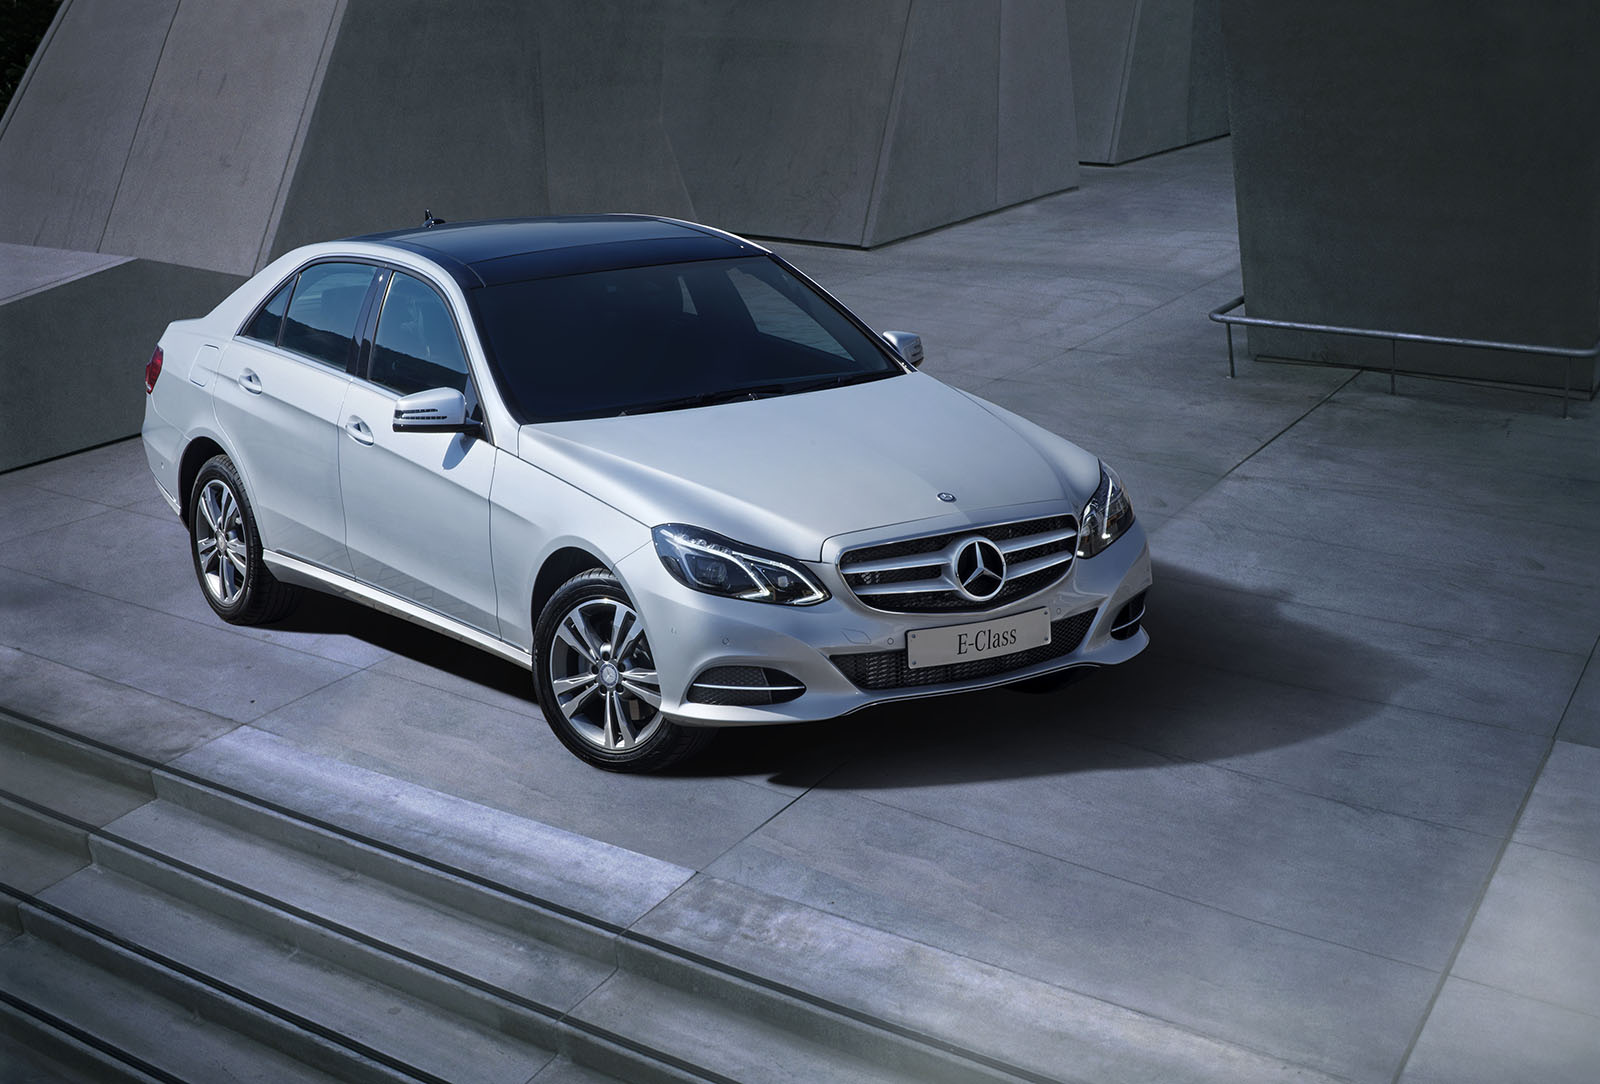 Indian Ministry Of External Affairs To Use Mercedes-Benz E-Class Sedans